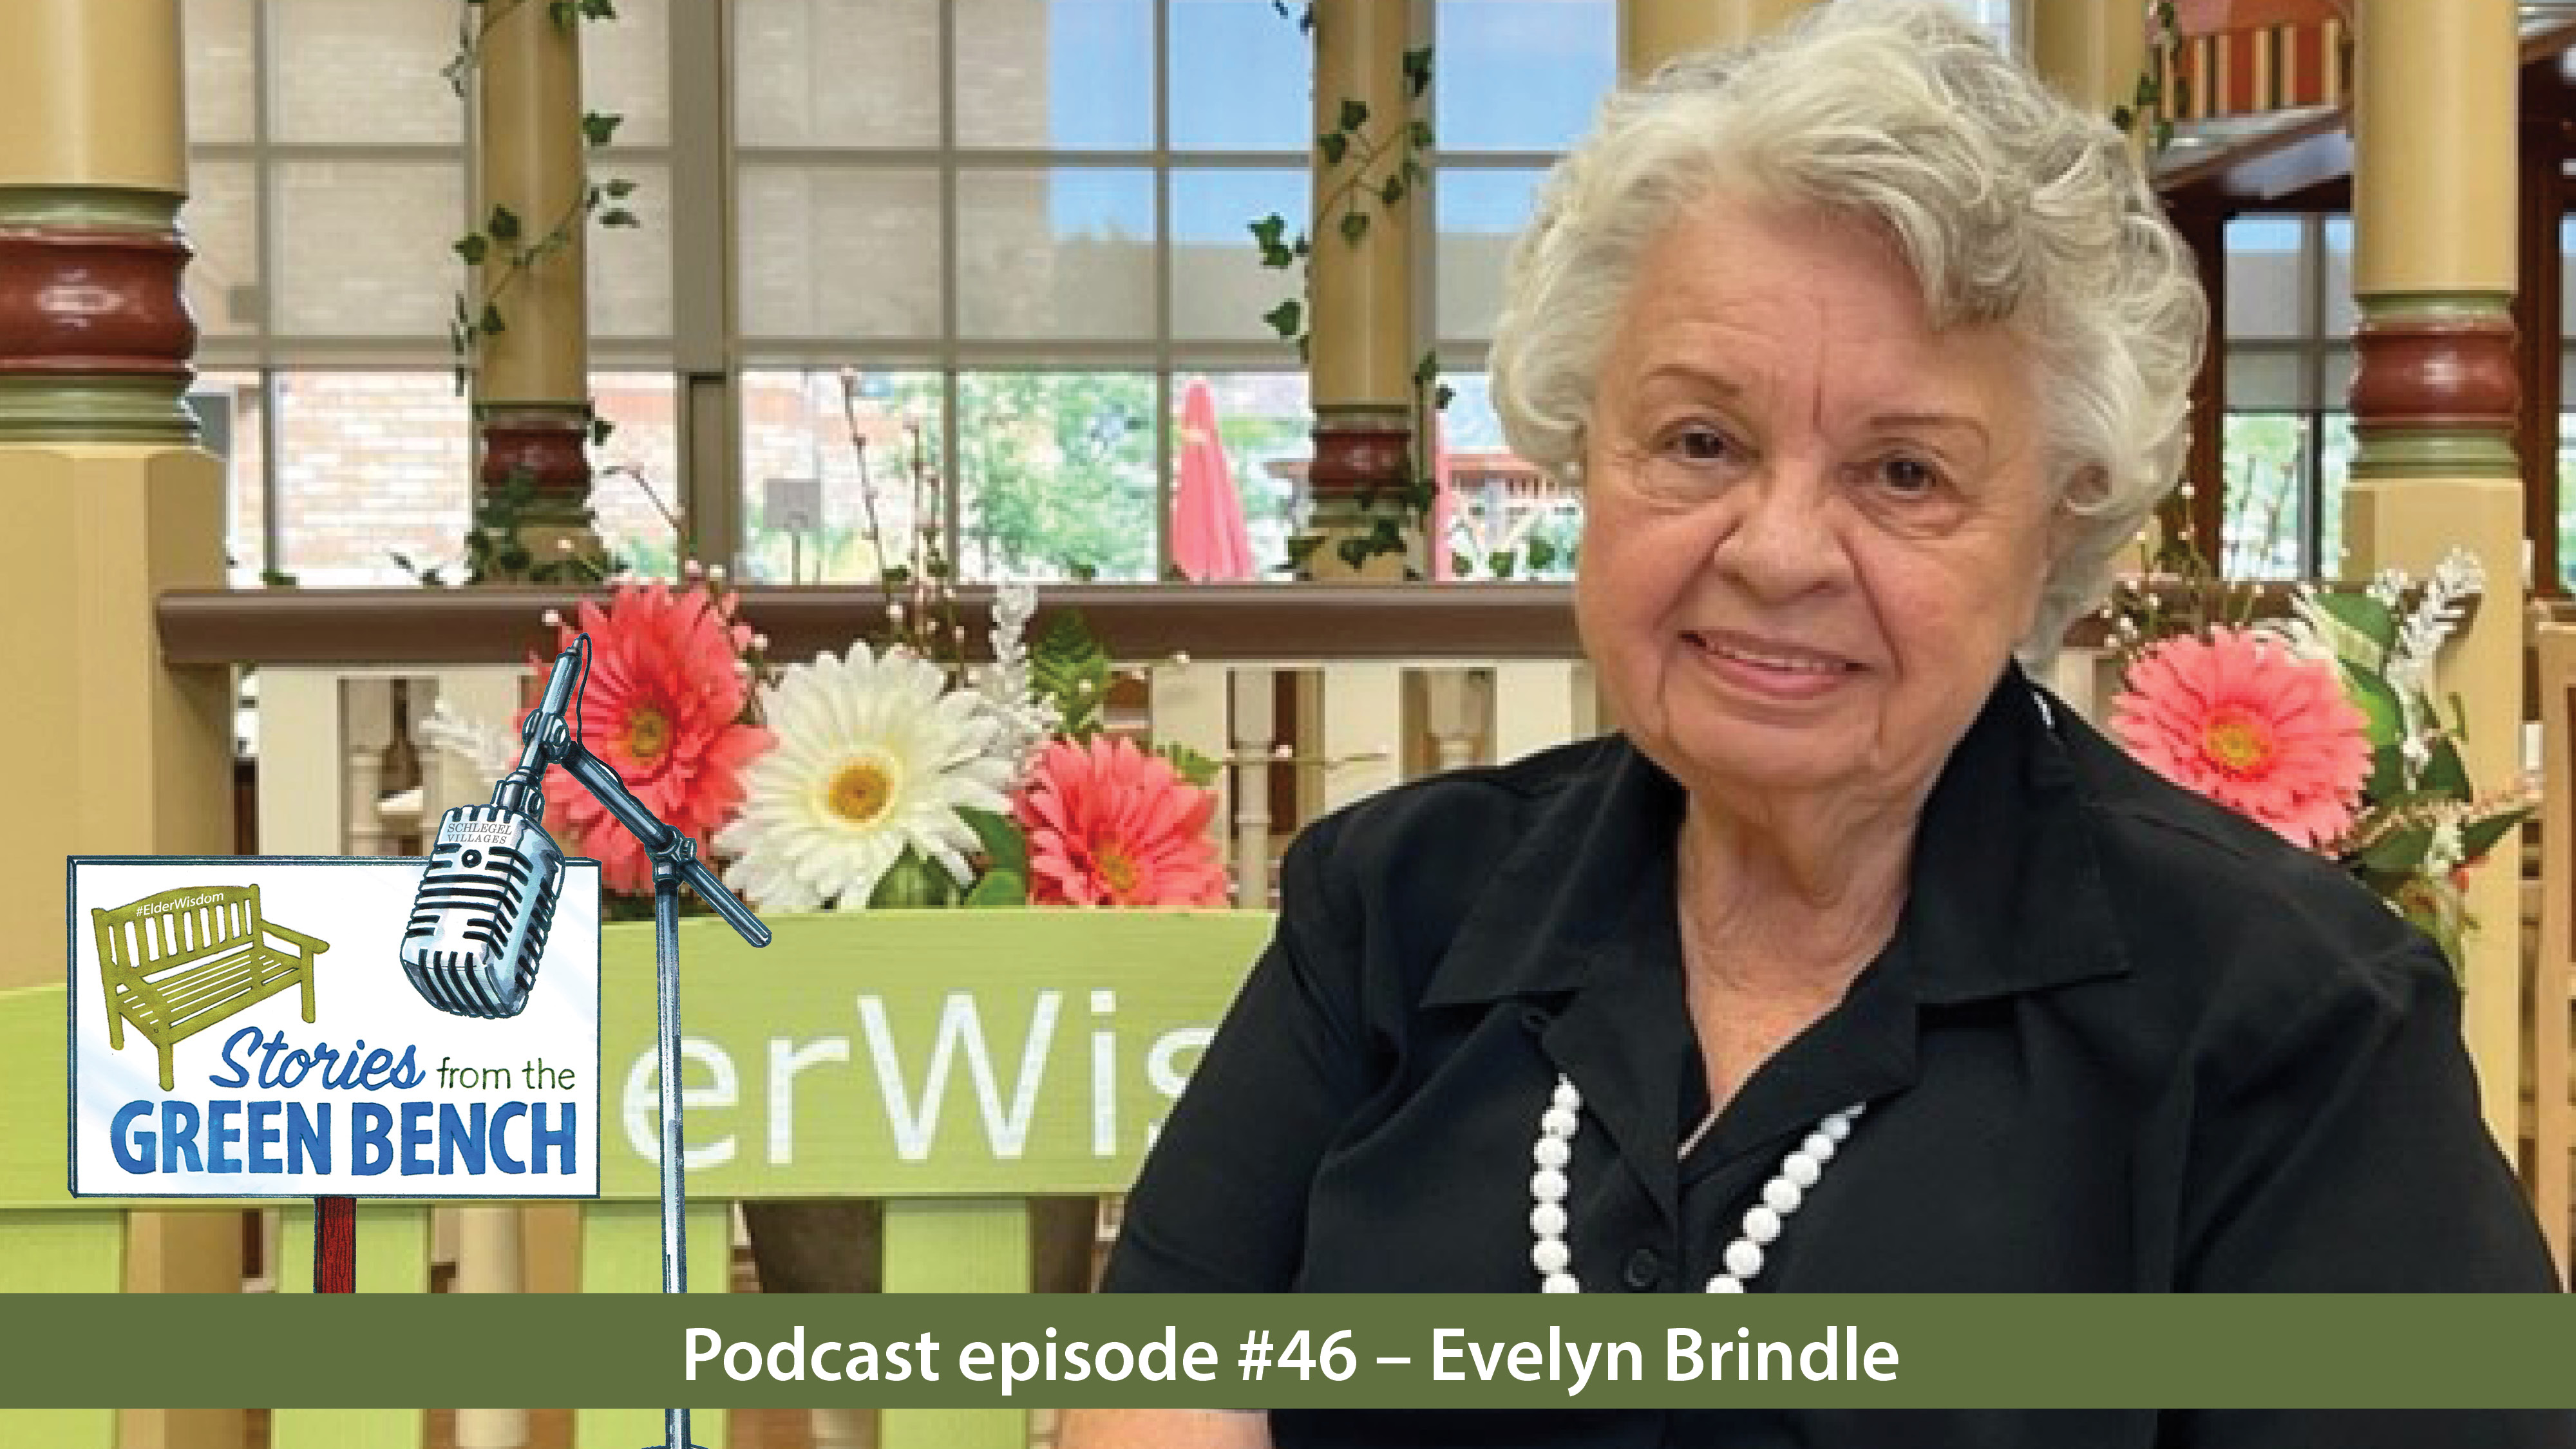 Evelyn Brindle on the green bench in promotion of her podcast episode